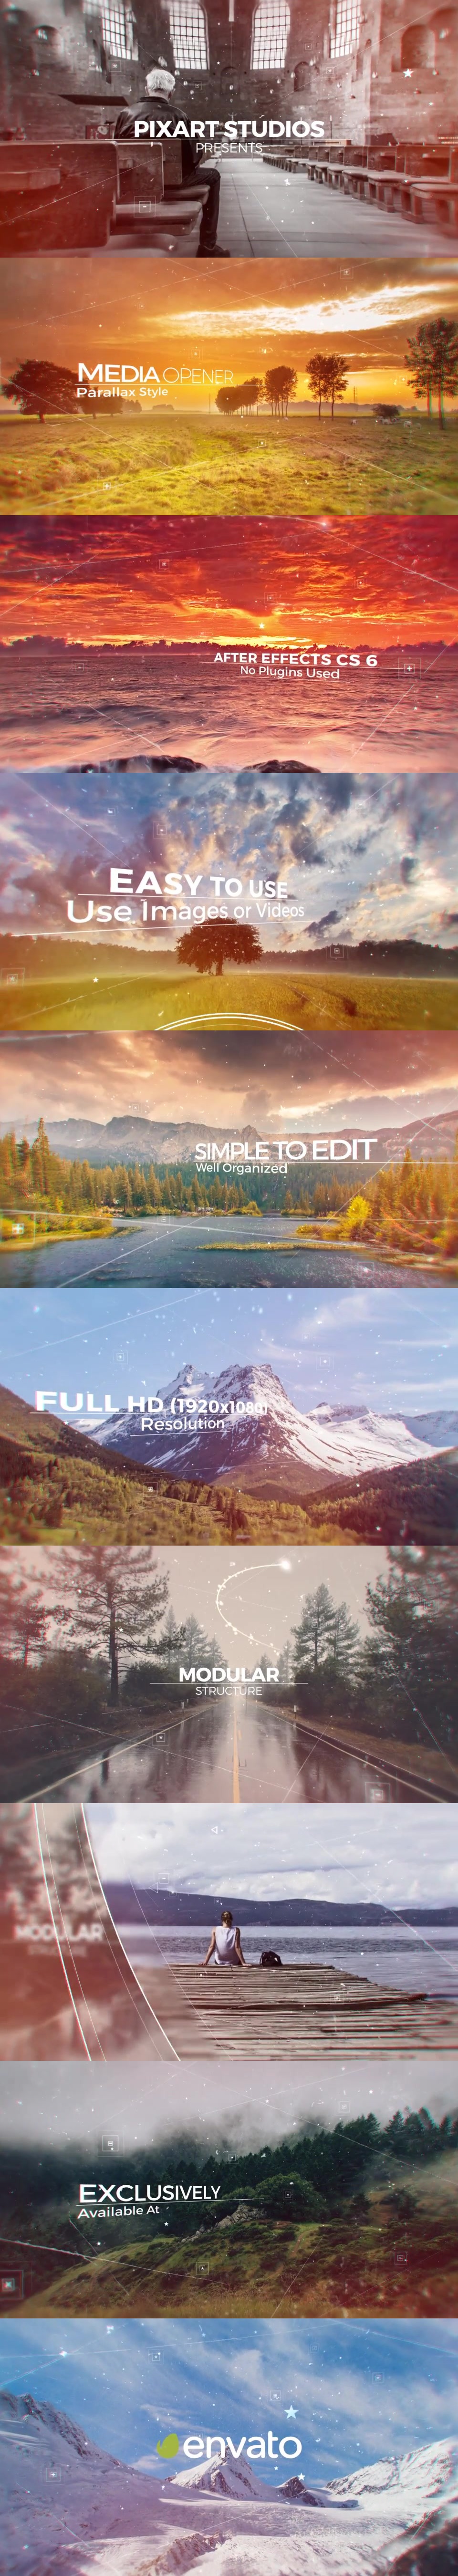 Videohive - Parallax Media Opener 17587296 - Free Download 